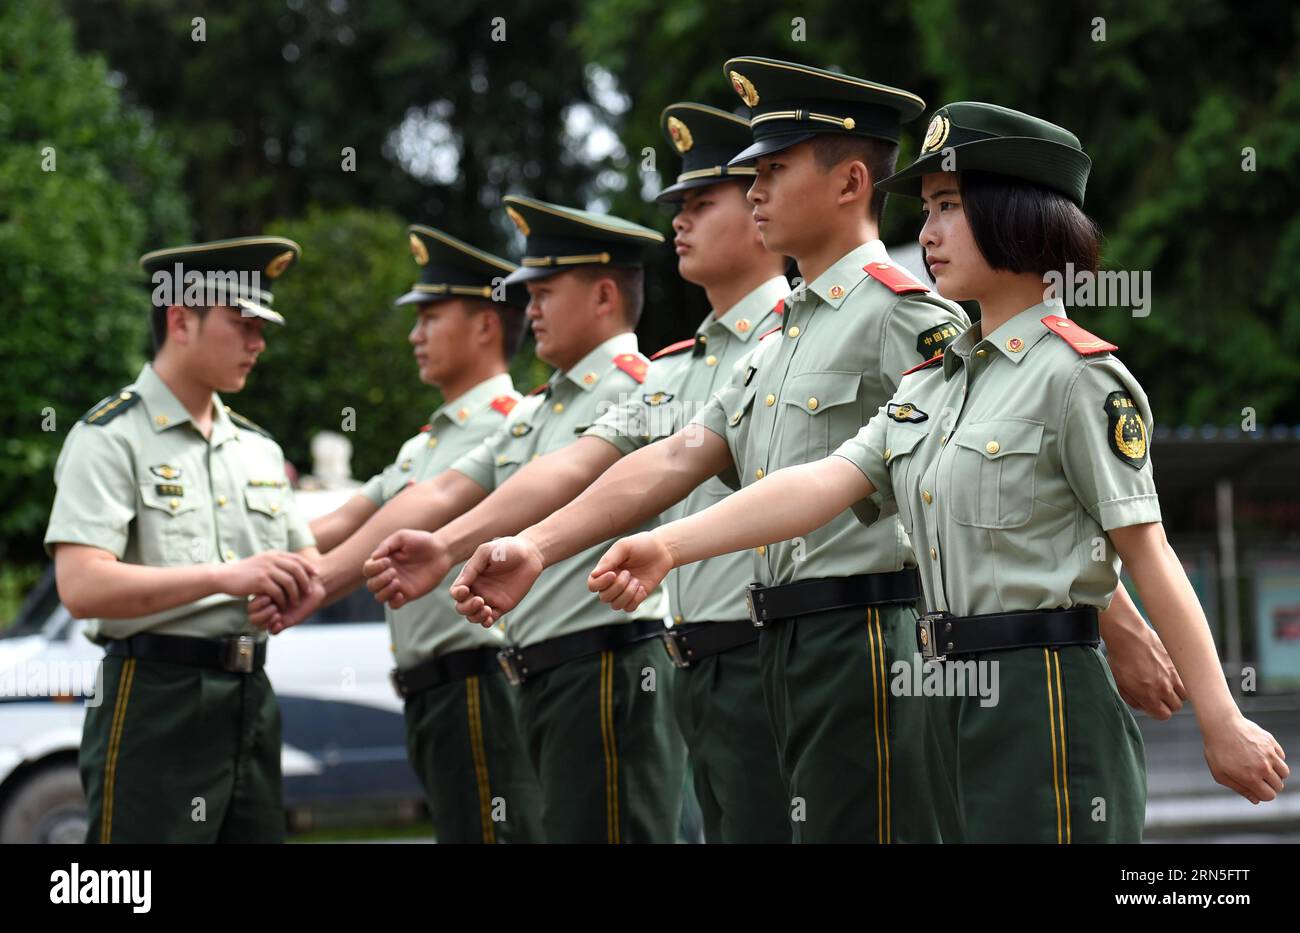 DEHONG, June 24, 2015 -- Zhang Liu (1st R) and her comrades are trained at the border checkpoint of Mukang in Dehong Dai-Jingpo Autonomous Prefecture, southwest China s Yunnan Province, June 24, 2015. Born in 1995, Zhang Liu became an anti-drug soldier in border checkpoint of Mukang in 2013. Grown up in an affluent family in central China s Hunan Province, Zhang said that being a soldier had always been her dream, which drove her to join the army after graduating from high school. Being a front line anti-drug force, the border checkpoint of Mukang has captured about 100 kilograms of drugs sinc Stock Photo